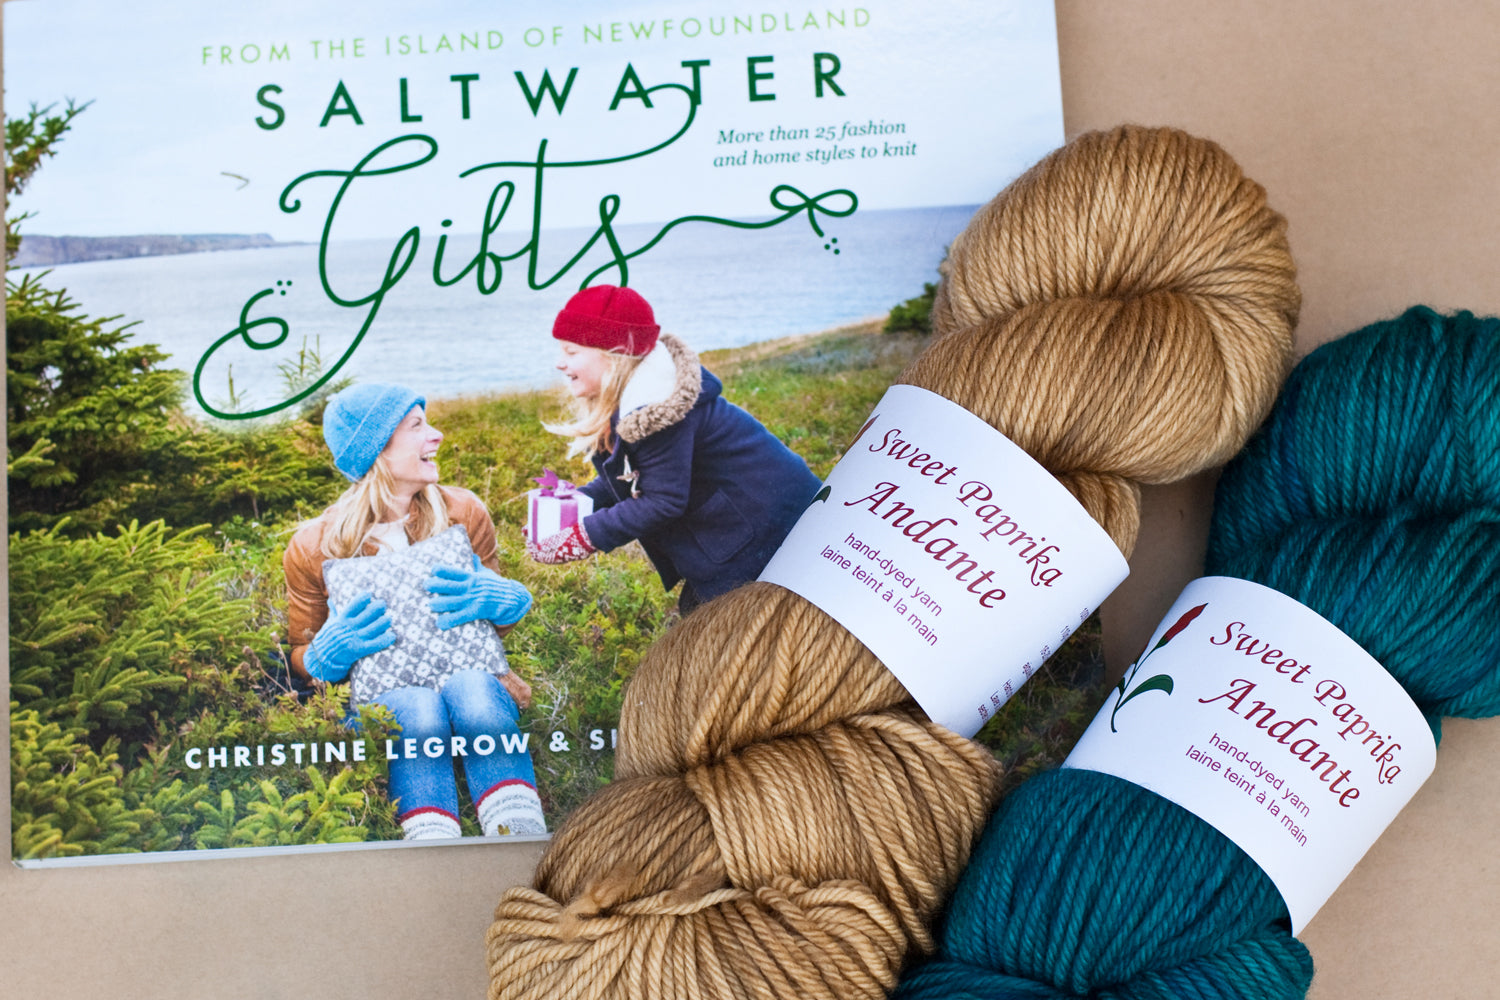 A copy of the Saltwater Gifts book with two skeins of hand-dyed yarn in a light brown and deep teal